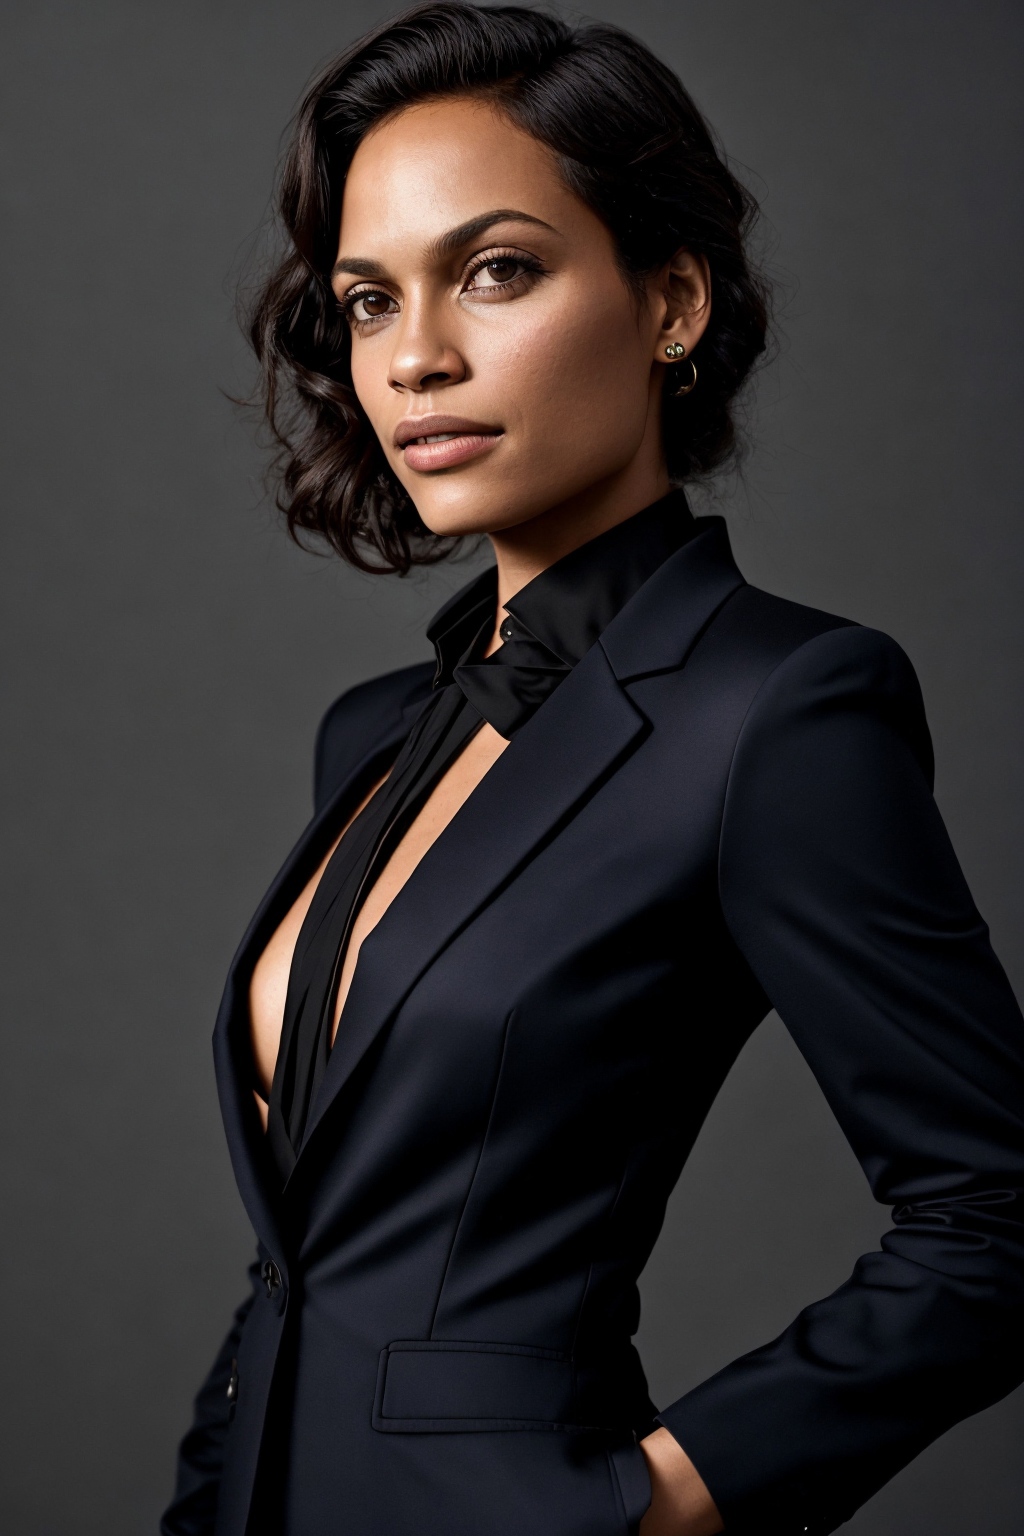 Rosario Dawson image by ngsm000